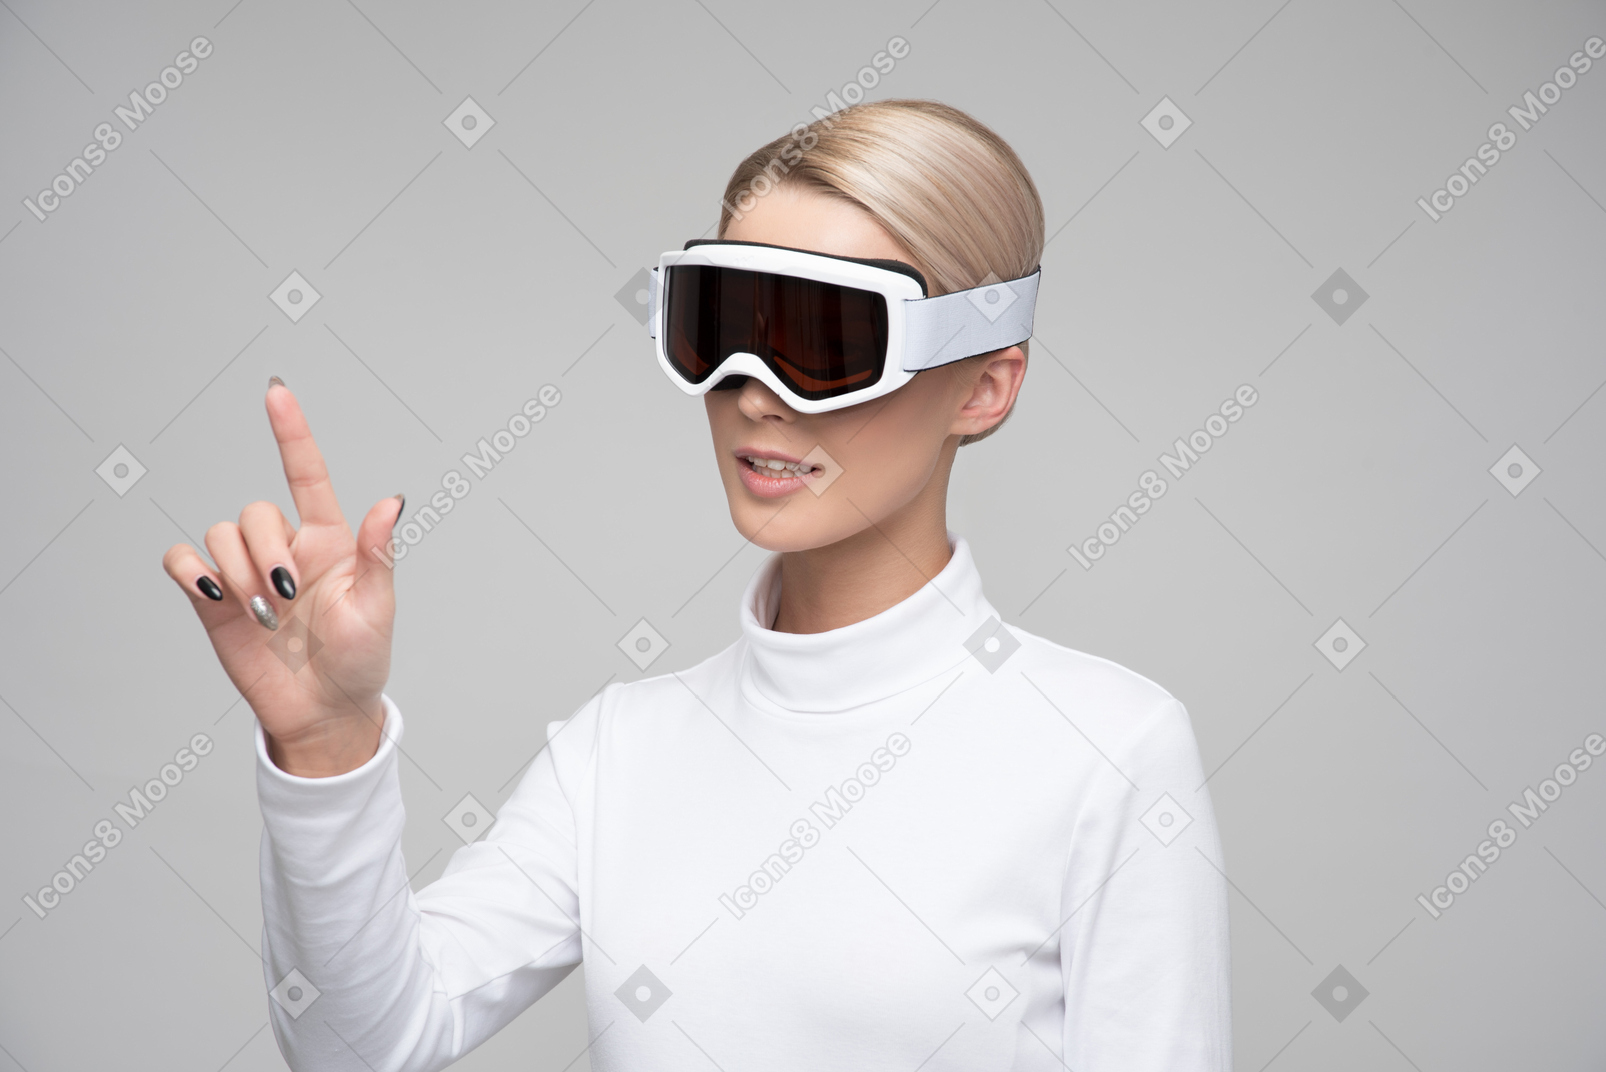 Young blonde woman in ski goggles